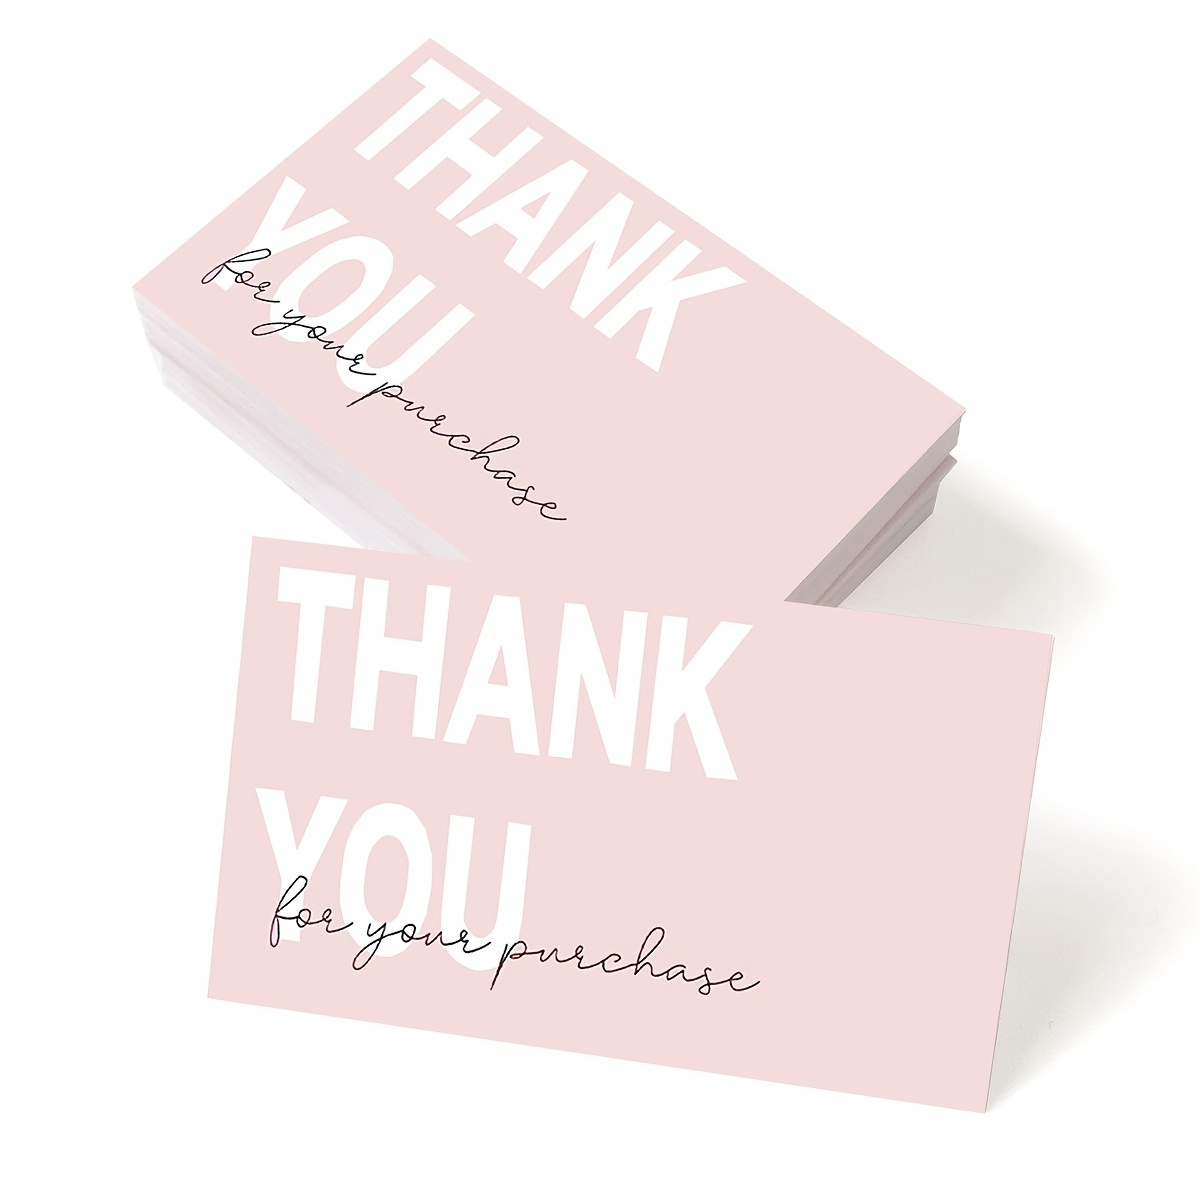 

50 Thank You Cards - Perfect For Business, Parties & More!